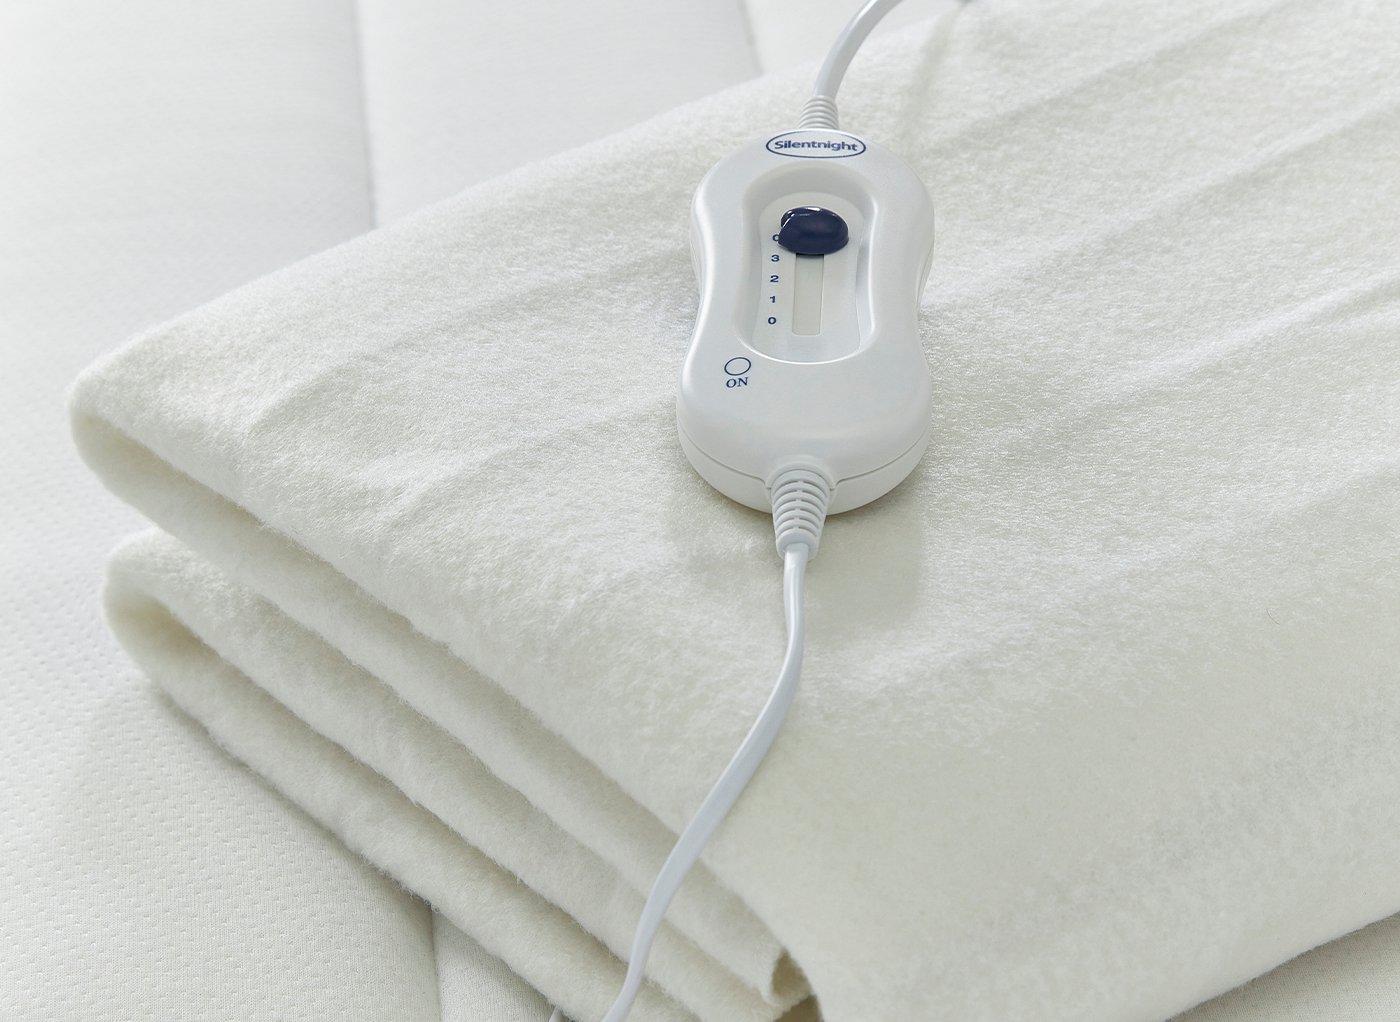 silentnight comfort control electric blanket heated mattress cover